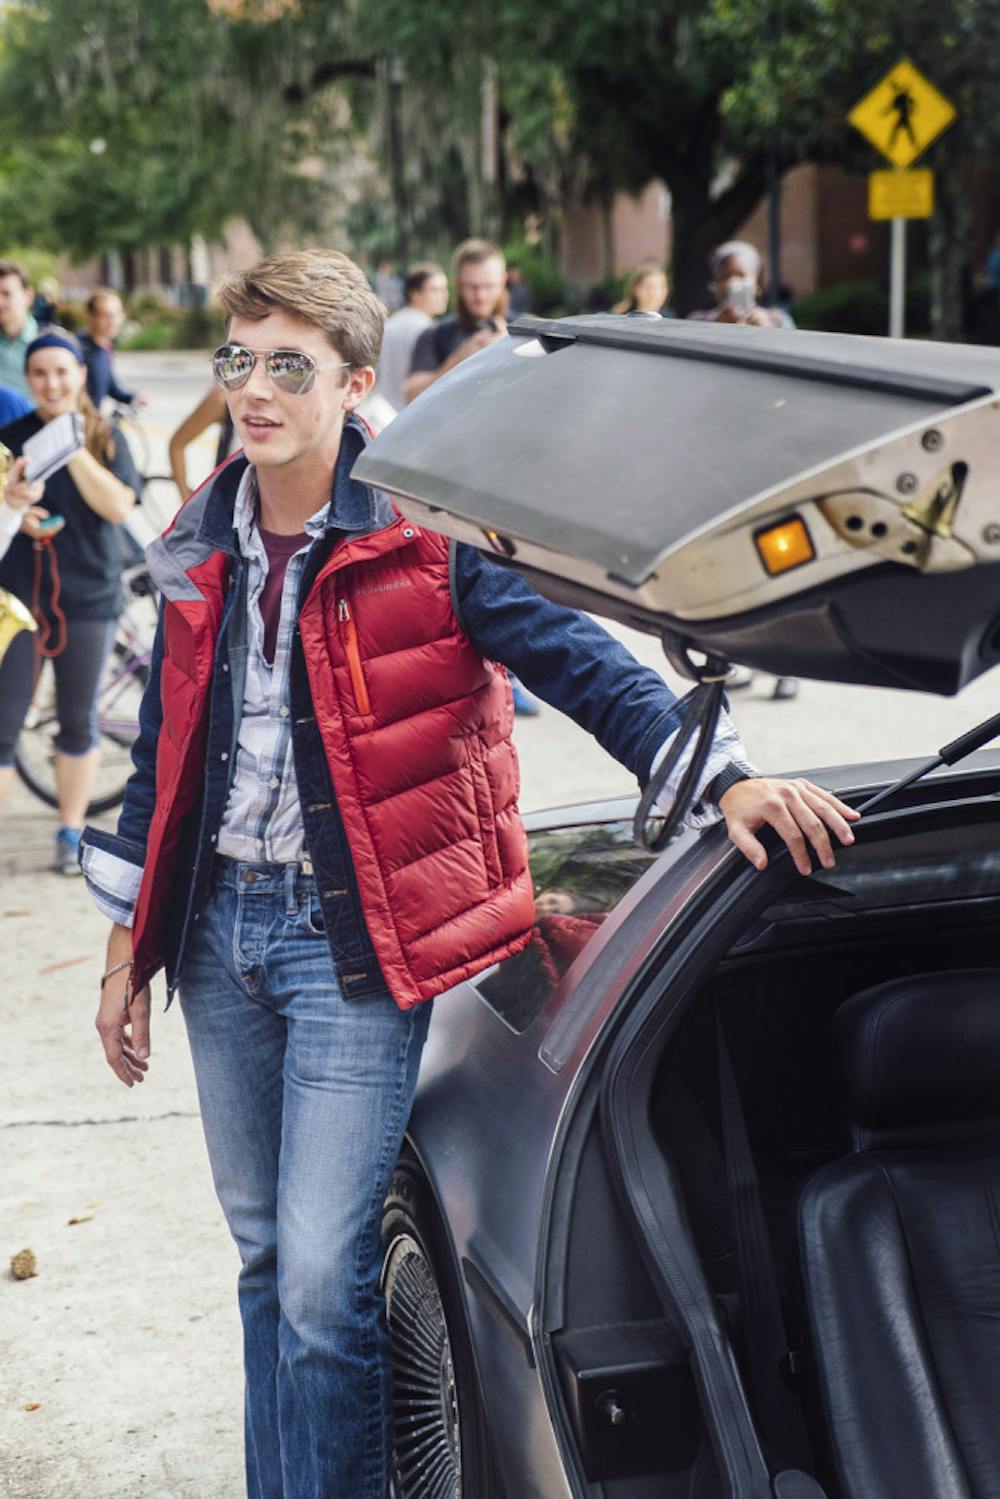 <p>Trace Hance, a 21-year-old telecommunication senior, poses for a group of about 600 students with his DeLorean car on the Plaza of the Americas on Oct. 21, 2015, for Back to the Future day celebrations. “As I stepped out of the car, the band parted and then I saw a semi-circle of phones staring at me,” Hance said.</p>